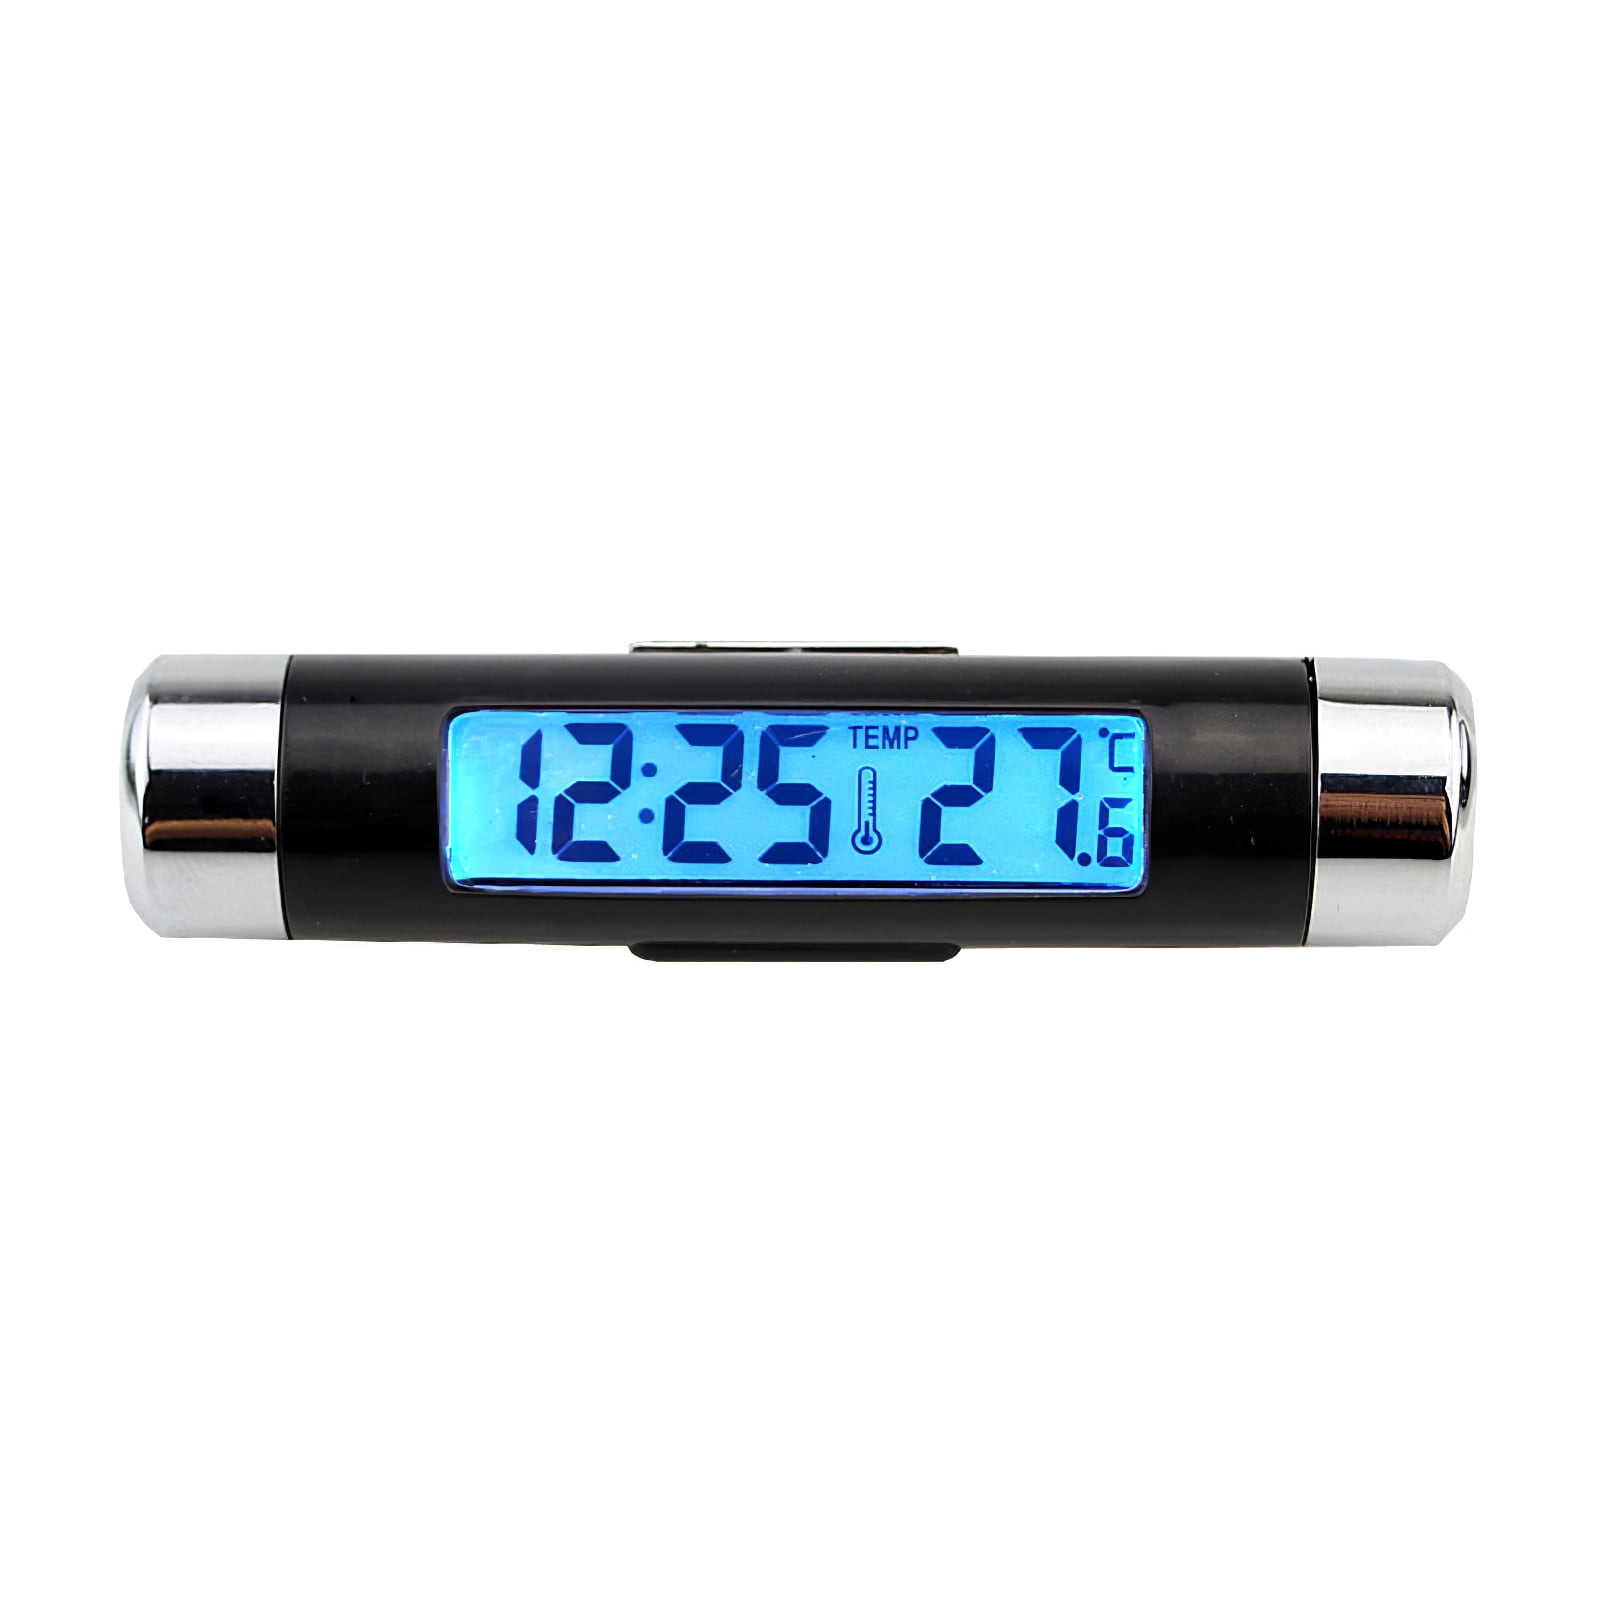 MEANLIN MEASURE Digital Display of Vehicle Temperature and time Temperature Dashboard Clock（Pack of 2） LCD Backlight Dual Conversion Mode 